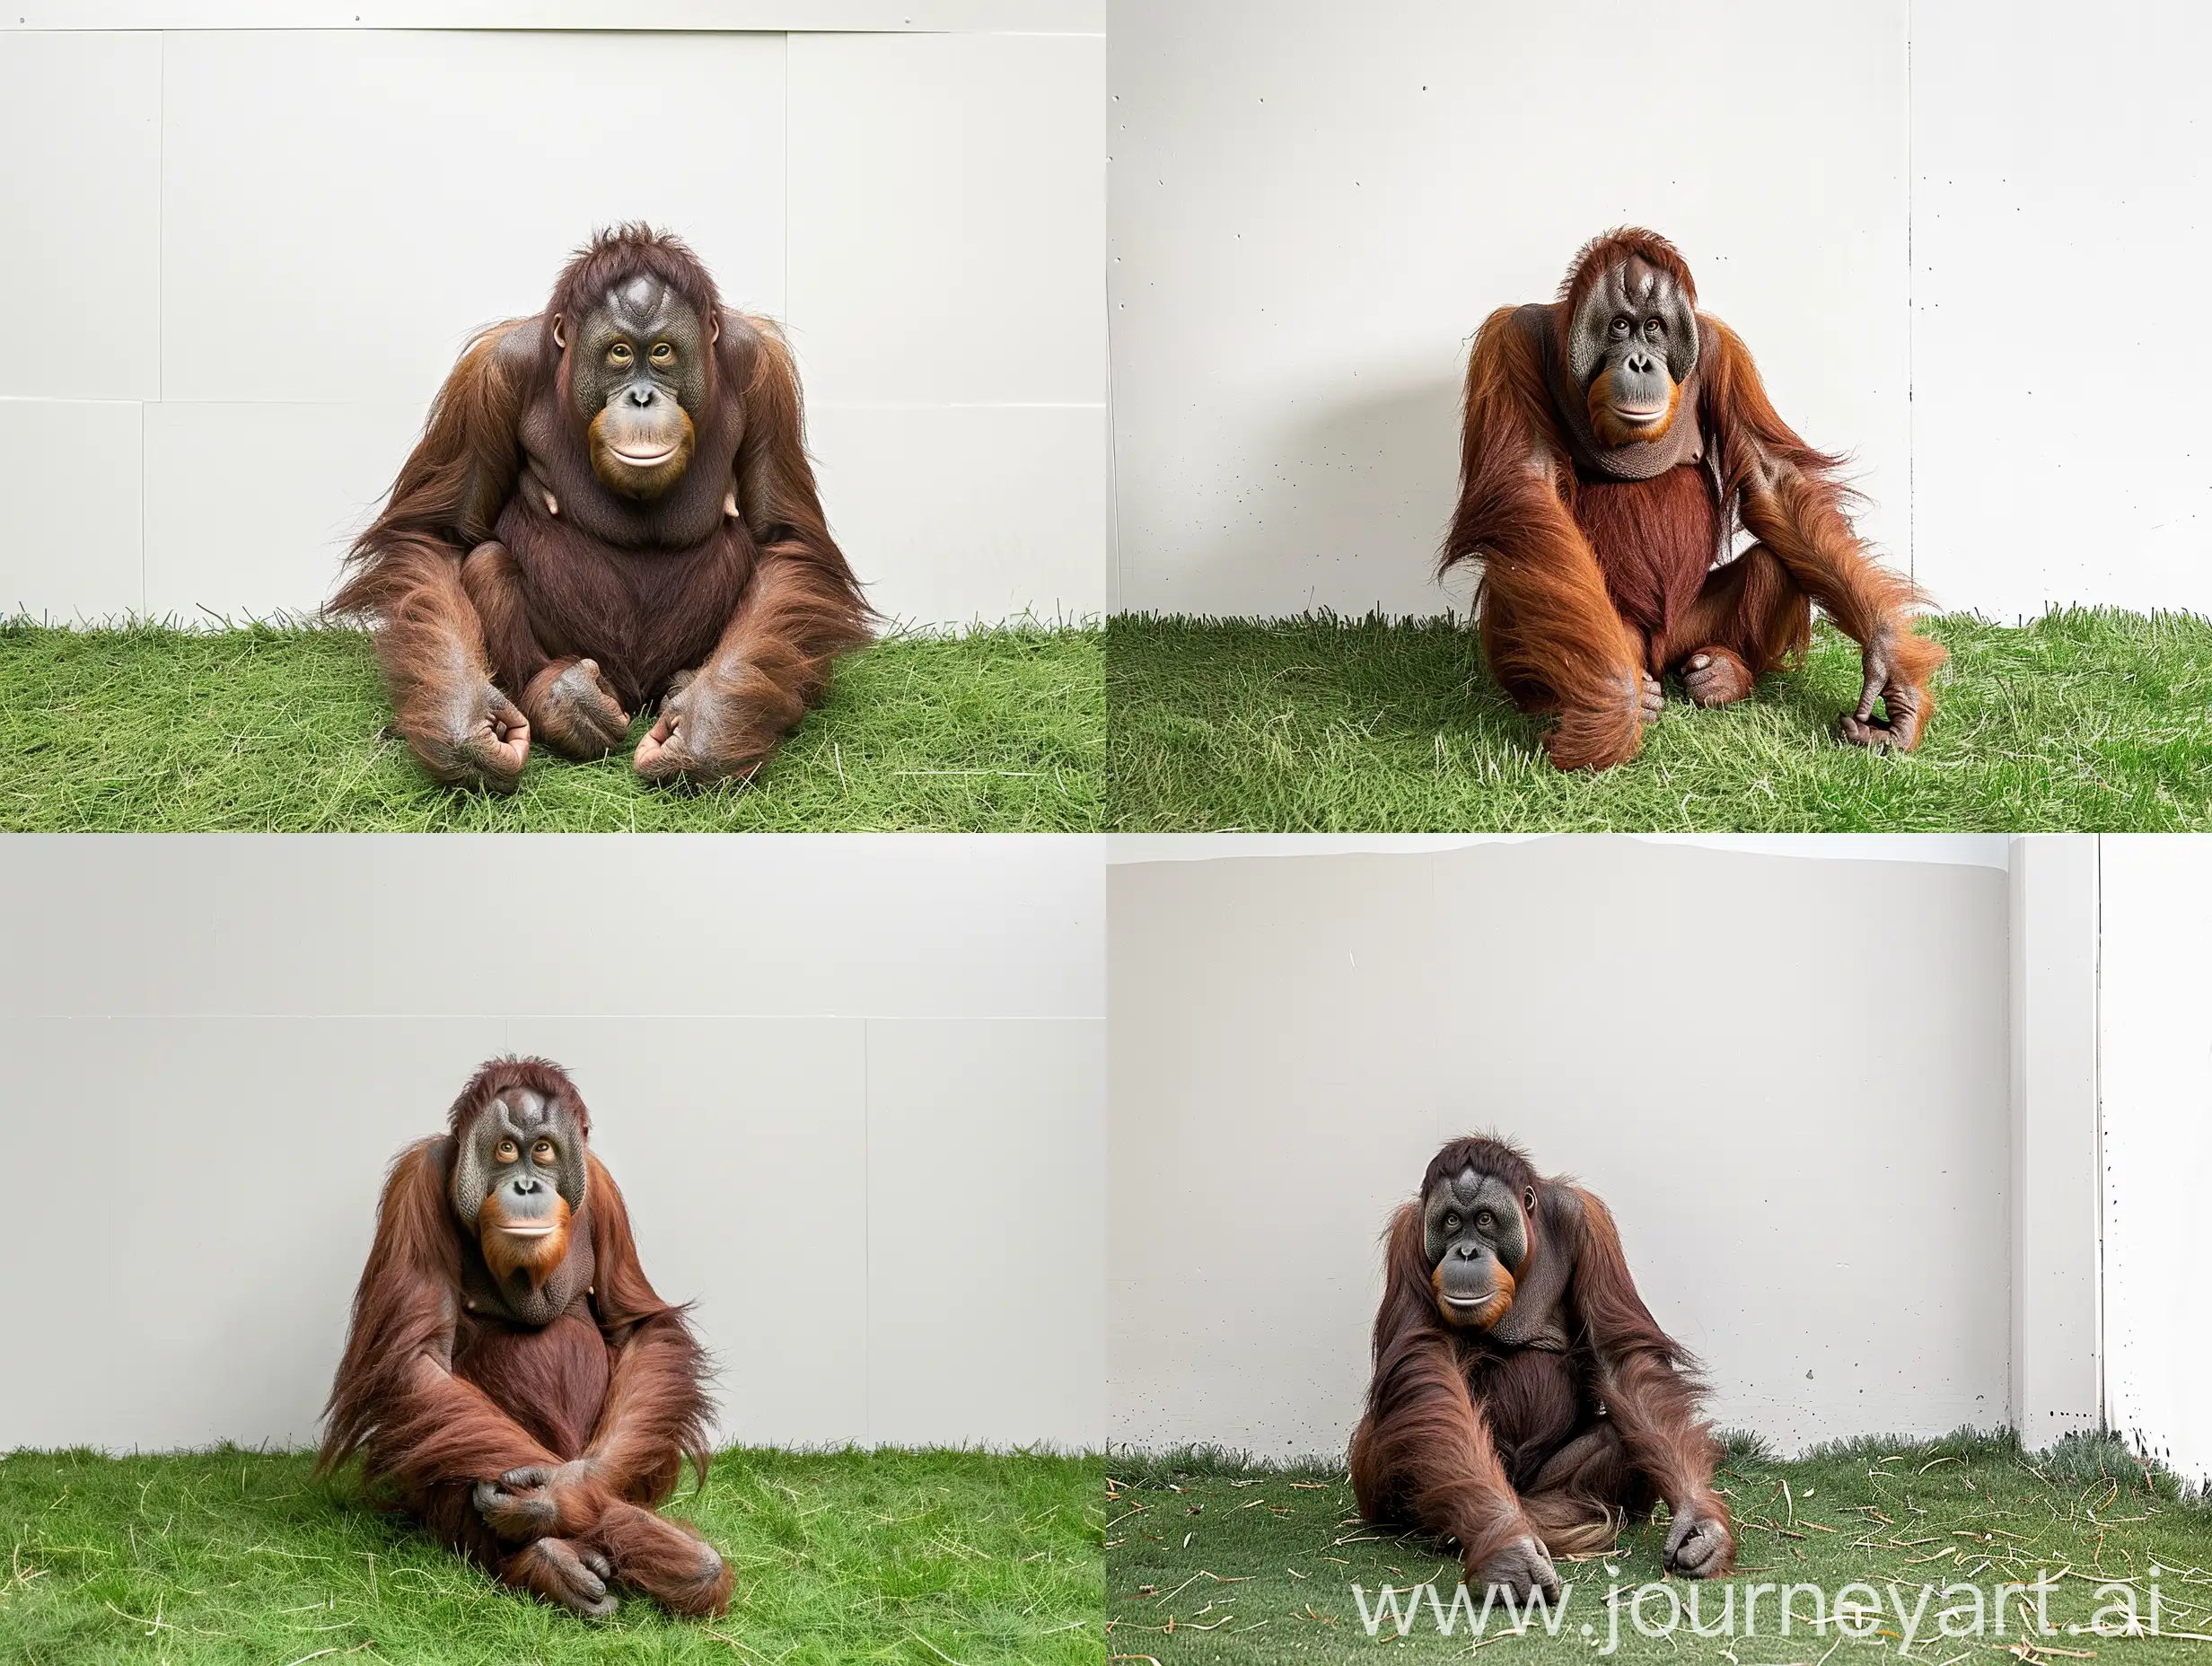 An orangutan sitting on grass in front of a white wall, hyper-realistic